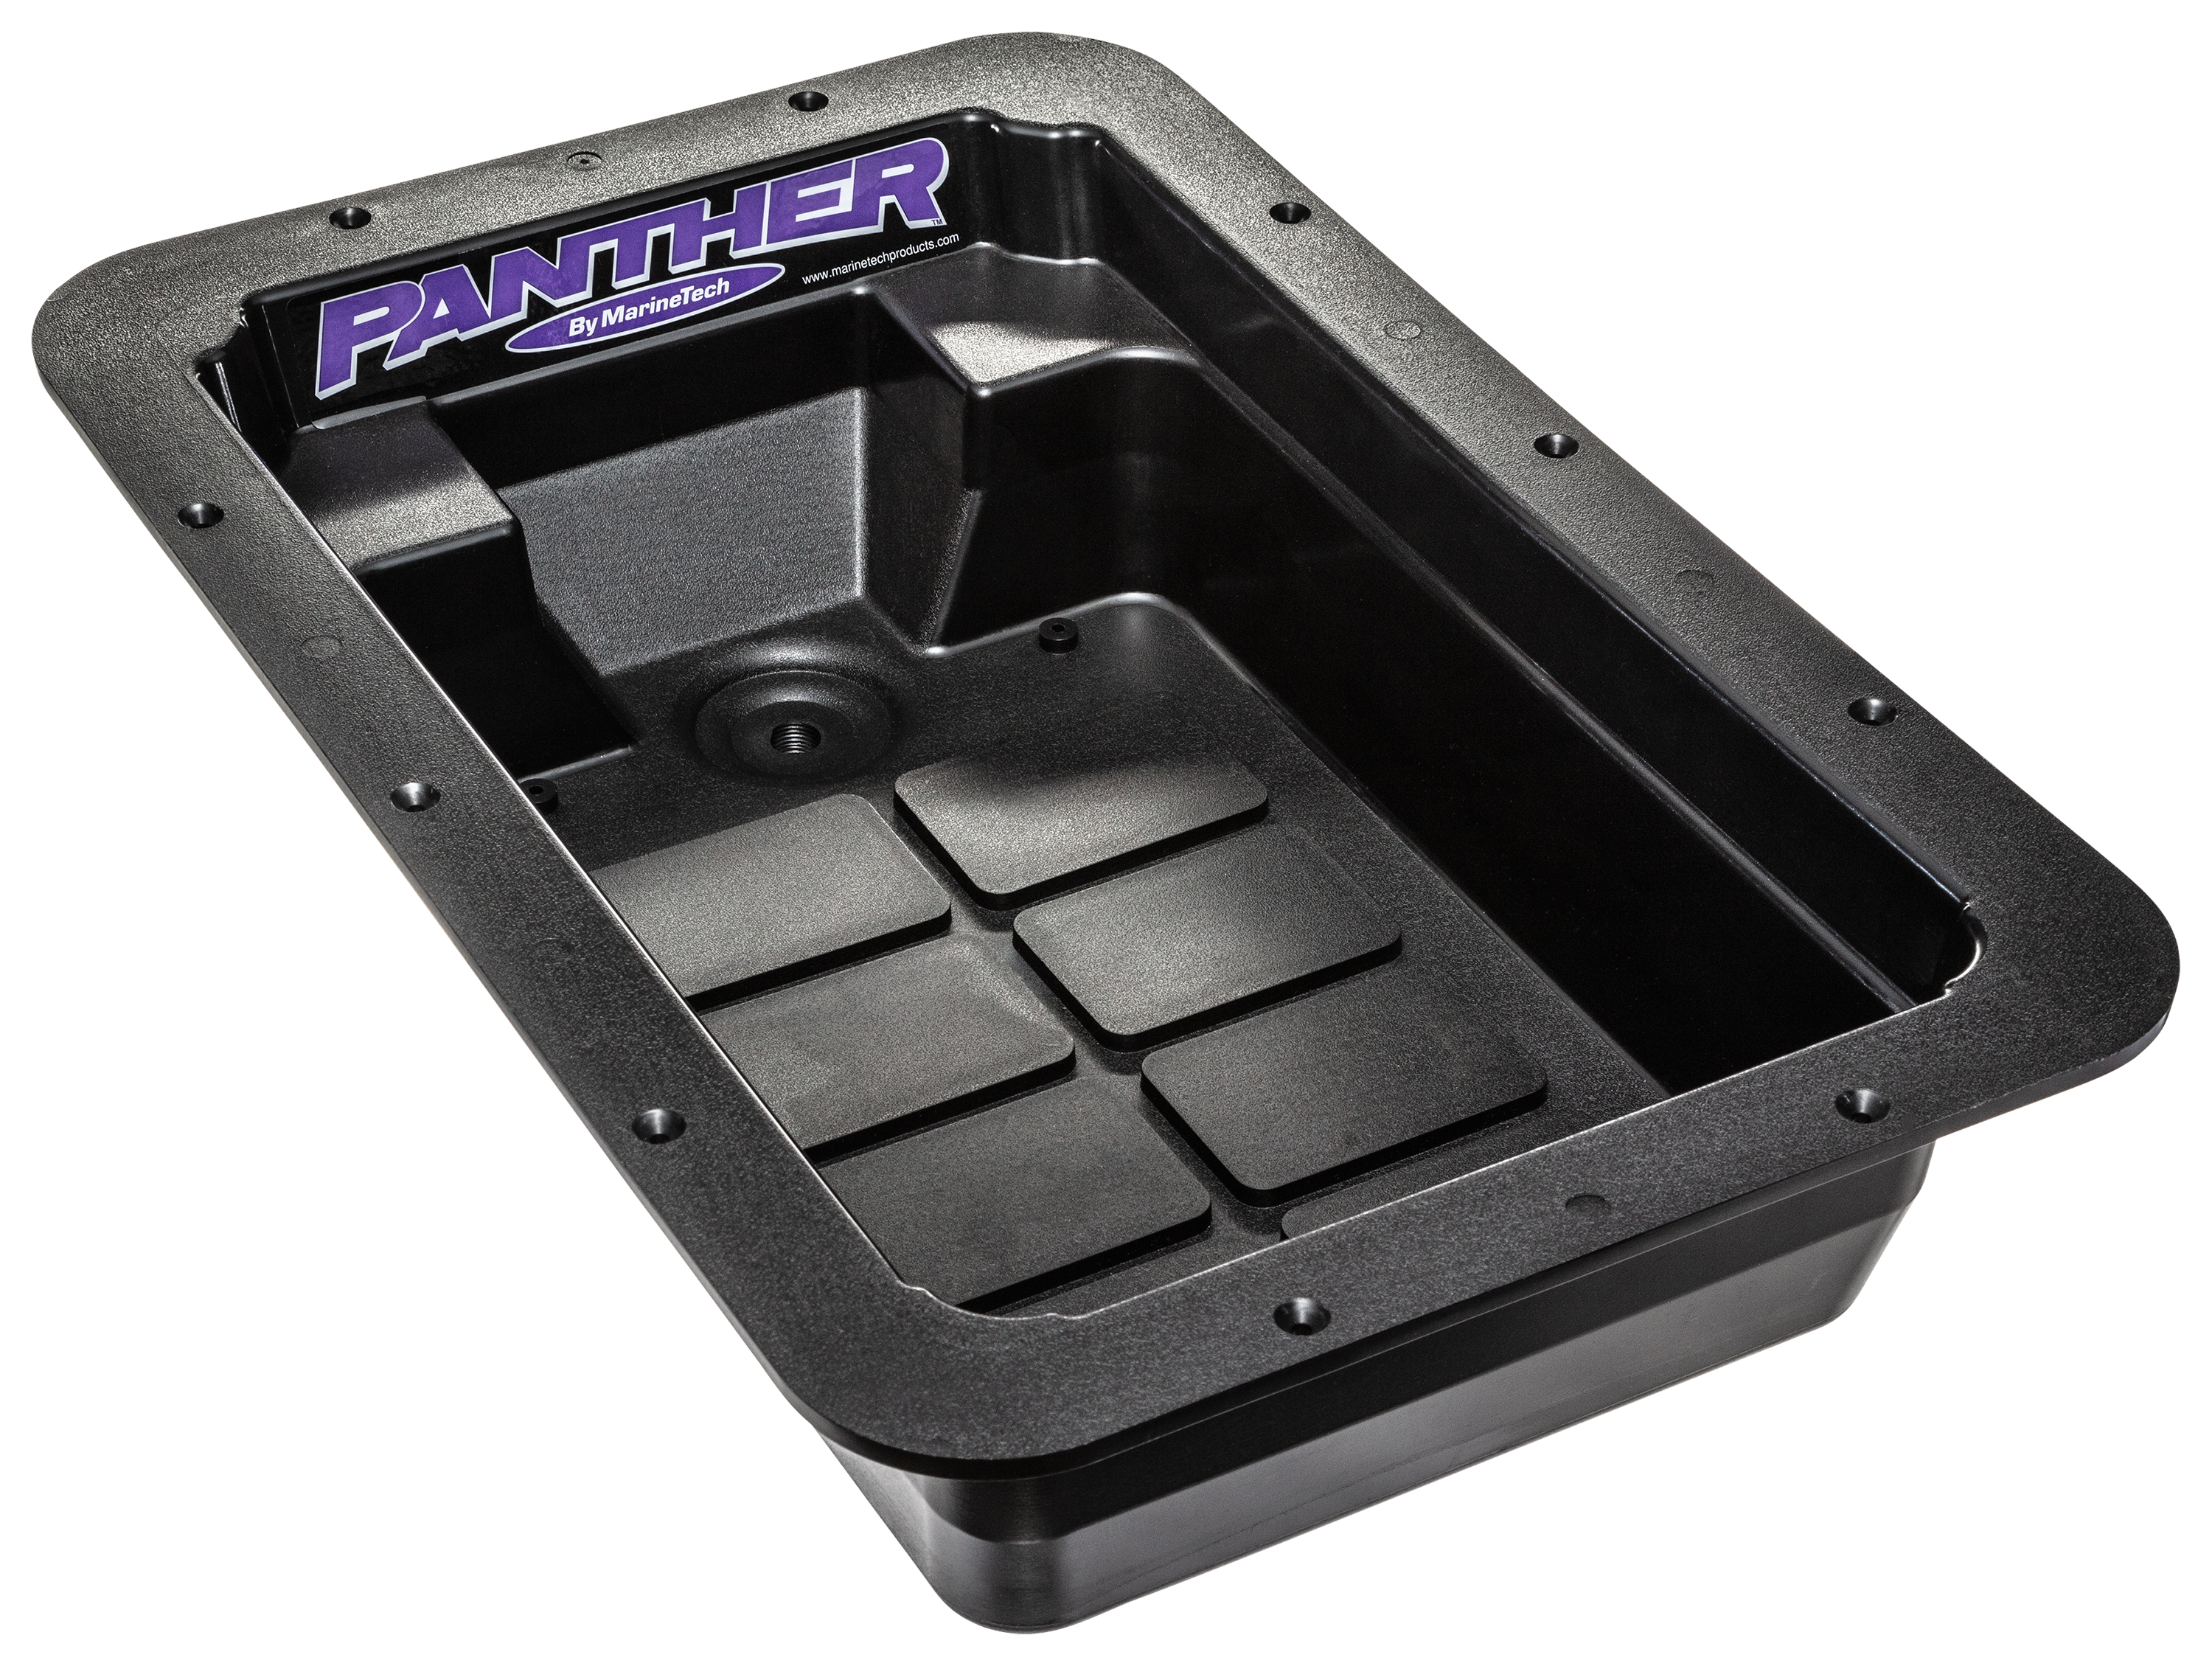 Panther MarineTech Trolling Motor Foot Control Tray